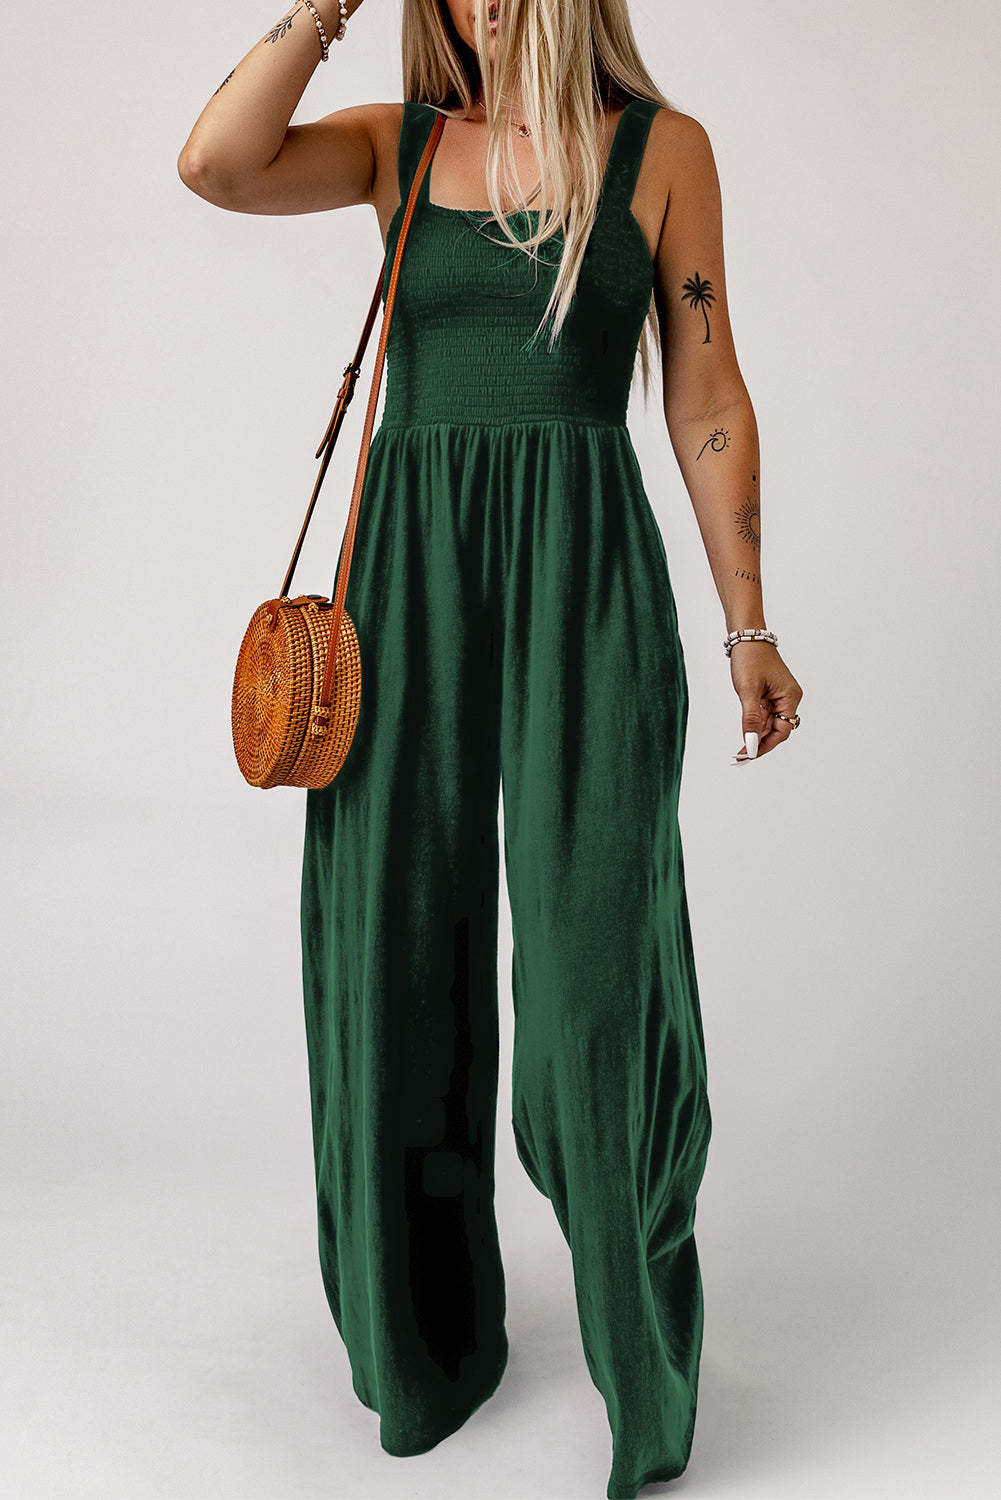 Green Smocked Sleeveless Wide Leg Jumpsuit with Pockets $ 29.99 - Evaless